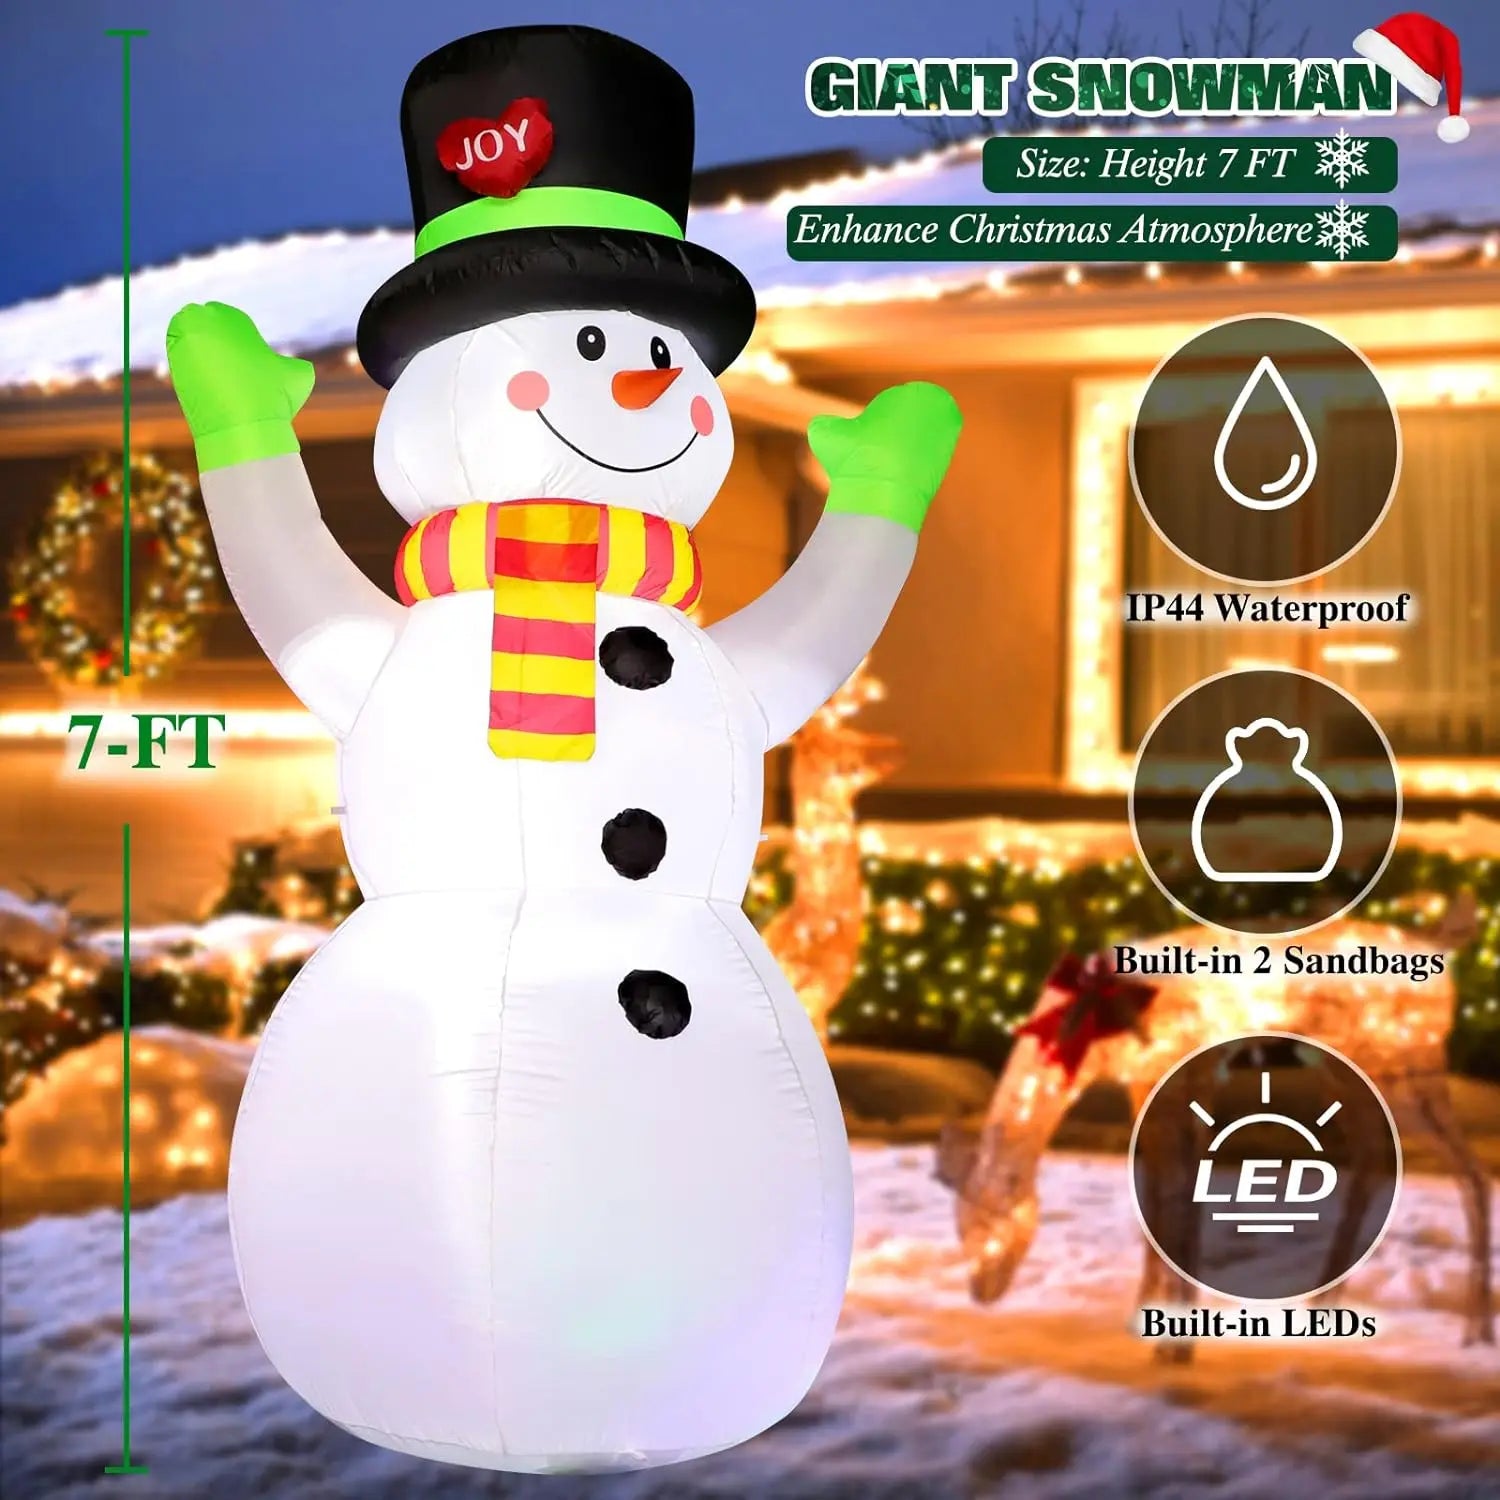 Snowman Inflatables Christmas Inflatables Decorations Built-in Colorful Rotating LED Indoor outdoor garden decoration Xmas Gift